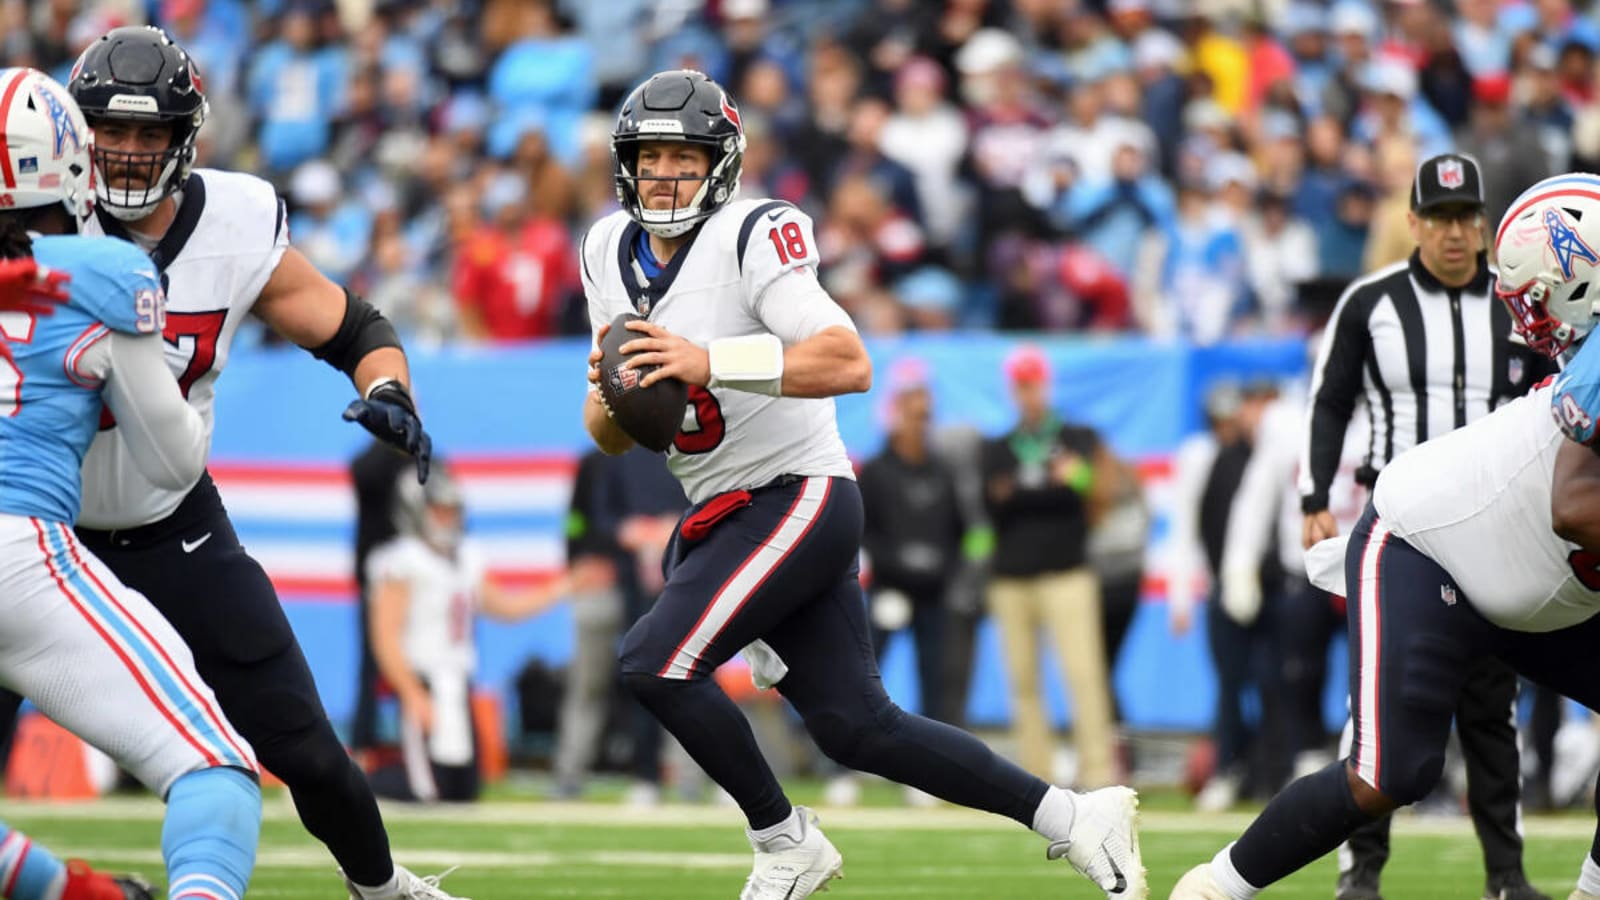 Texans returning to Case Keenum with playoff hopes on the line